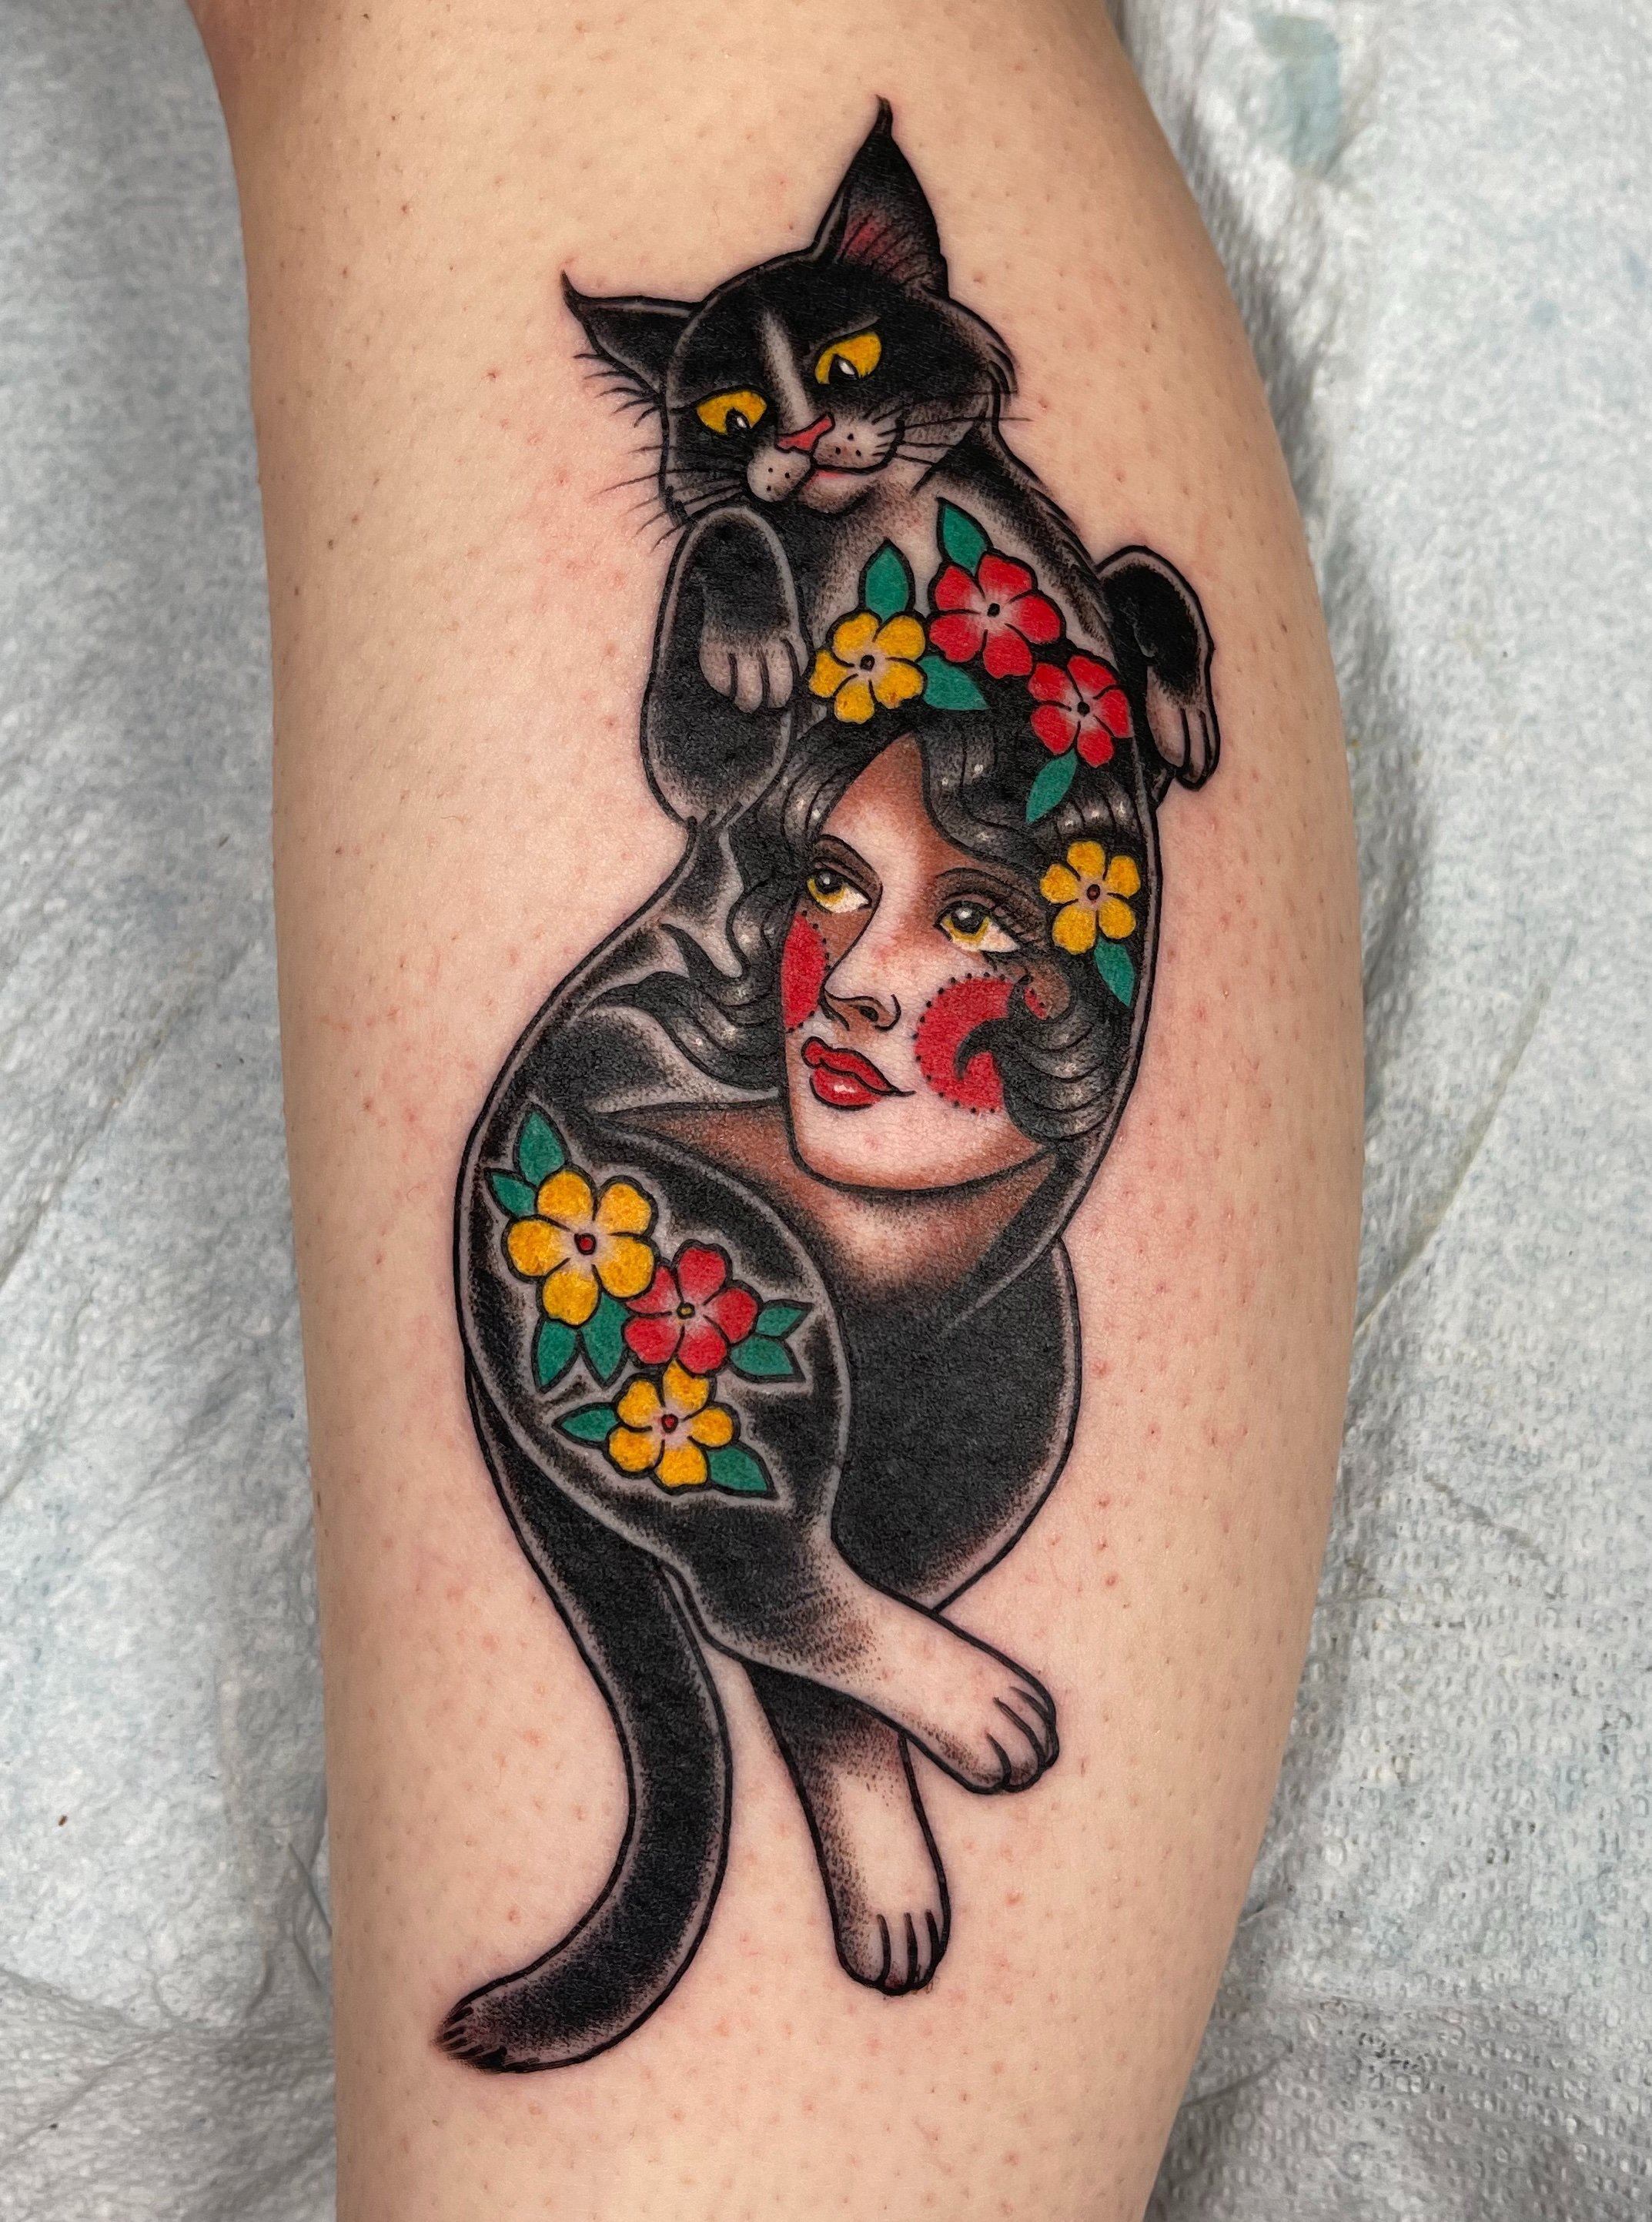 Black Cat Tattoos Designs Ideas and Meaning  Tattoos For You